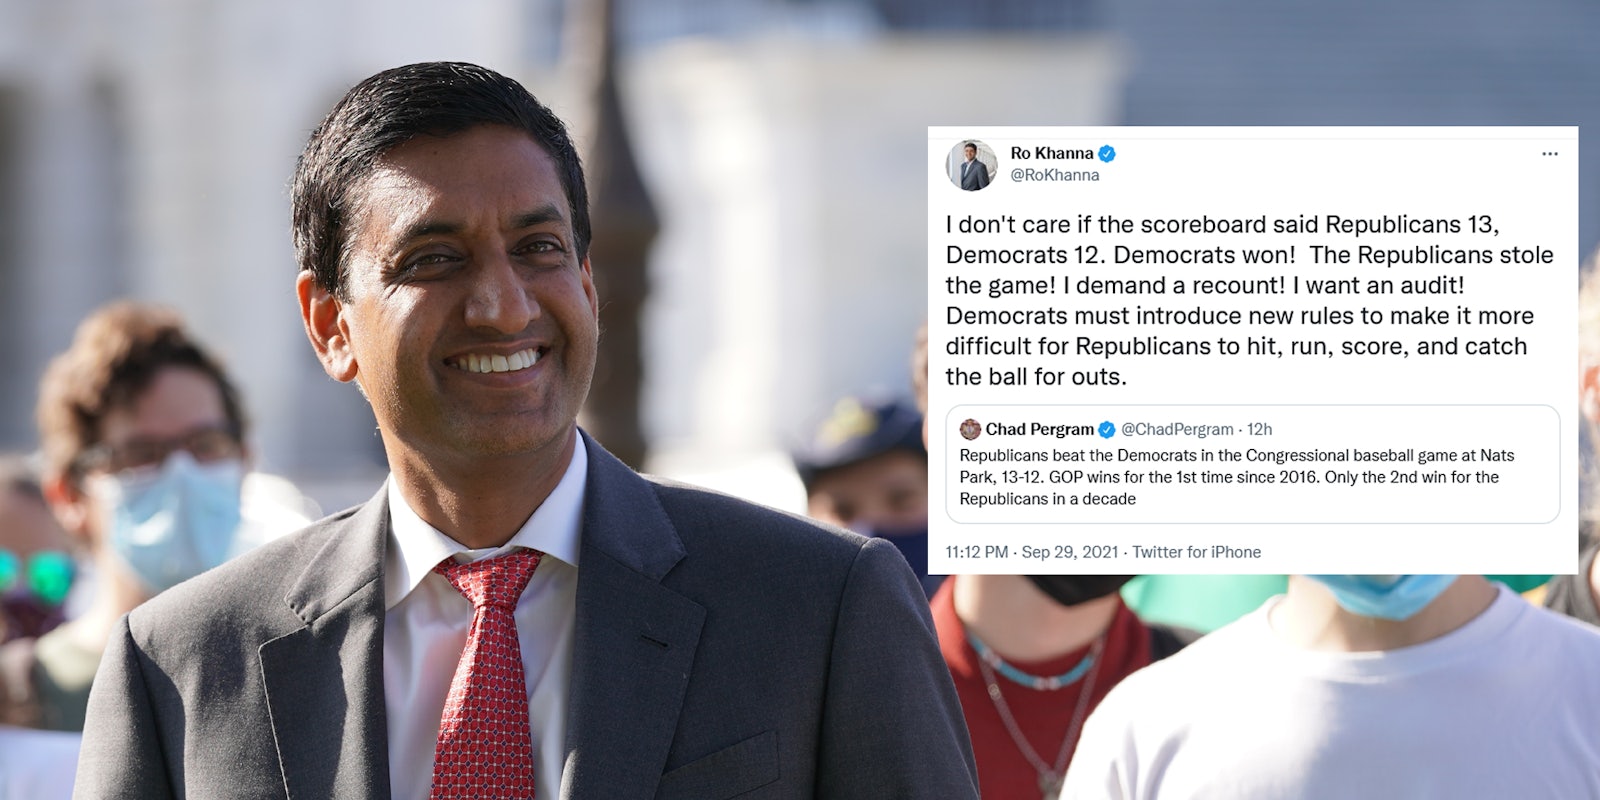 Rep. Ro Khanna (D-Calif.) smiling. Next to him is his tweet using the results of the Congressional baseball game to mock Republicans false election fraud claims.